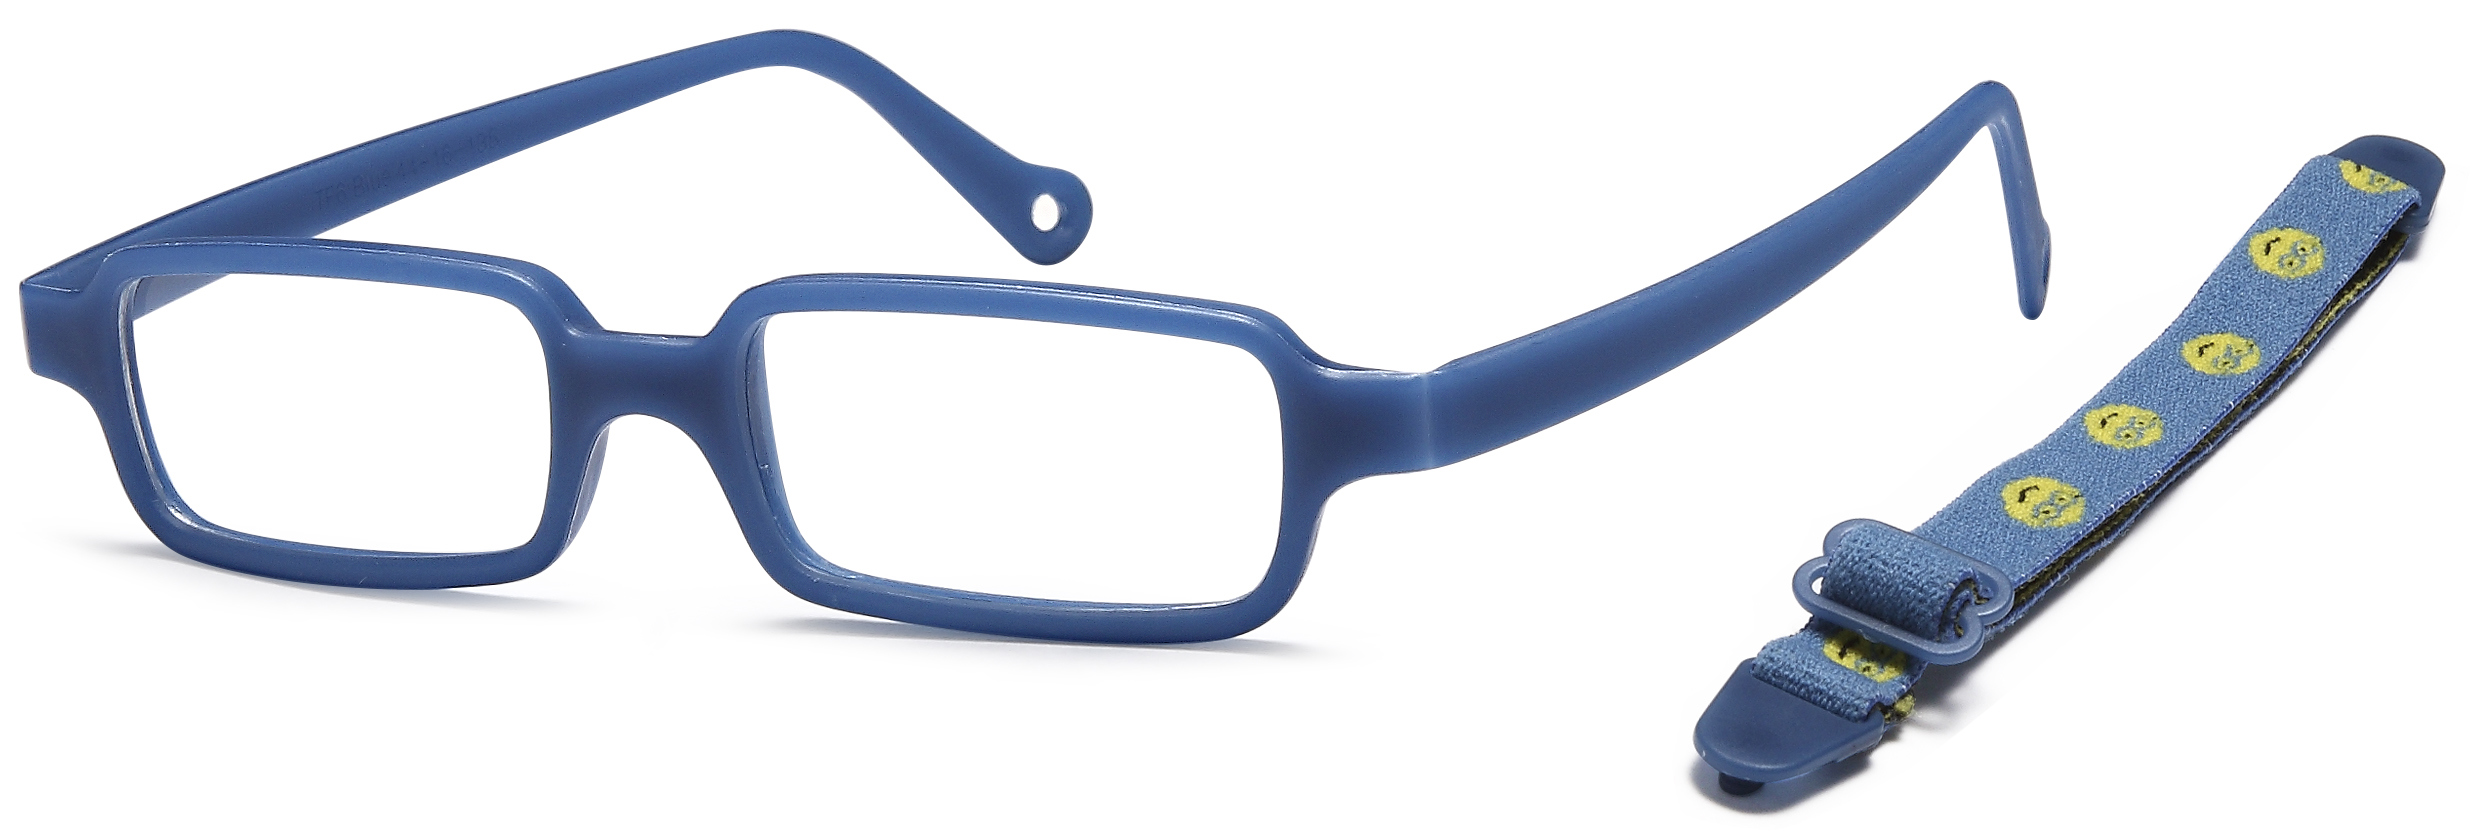 Picture of Trendy Eyeglasses TF6